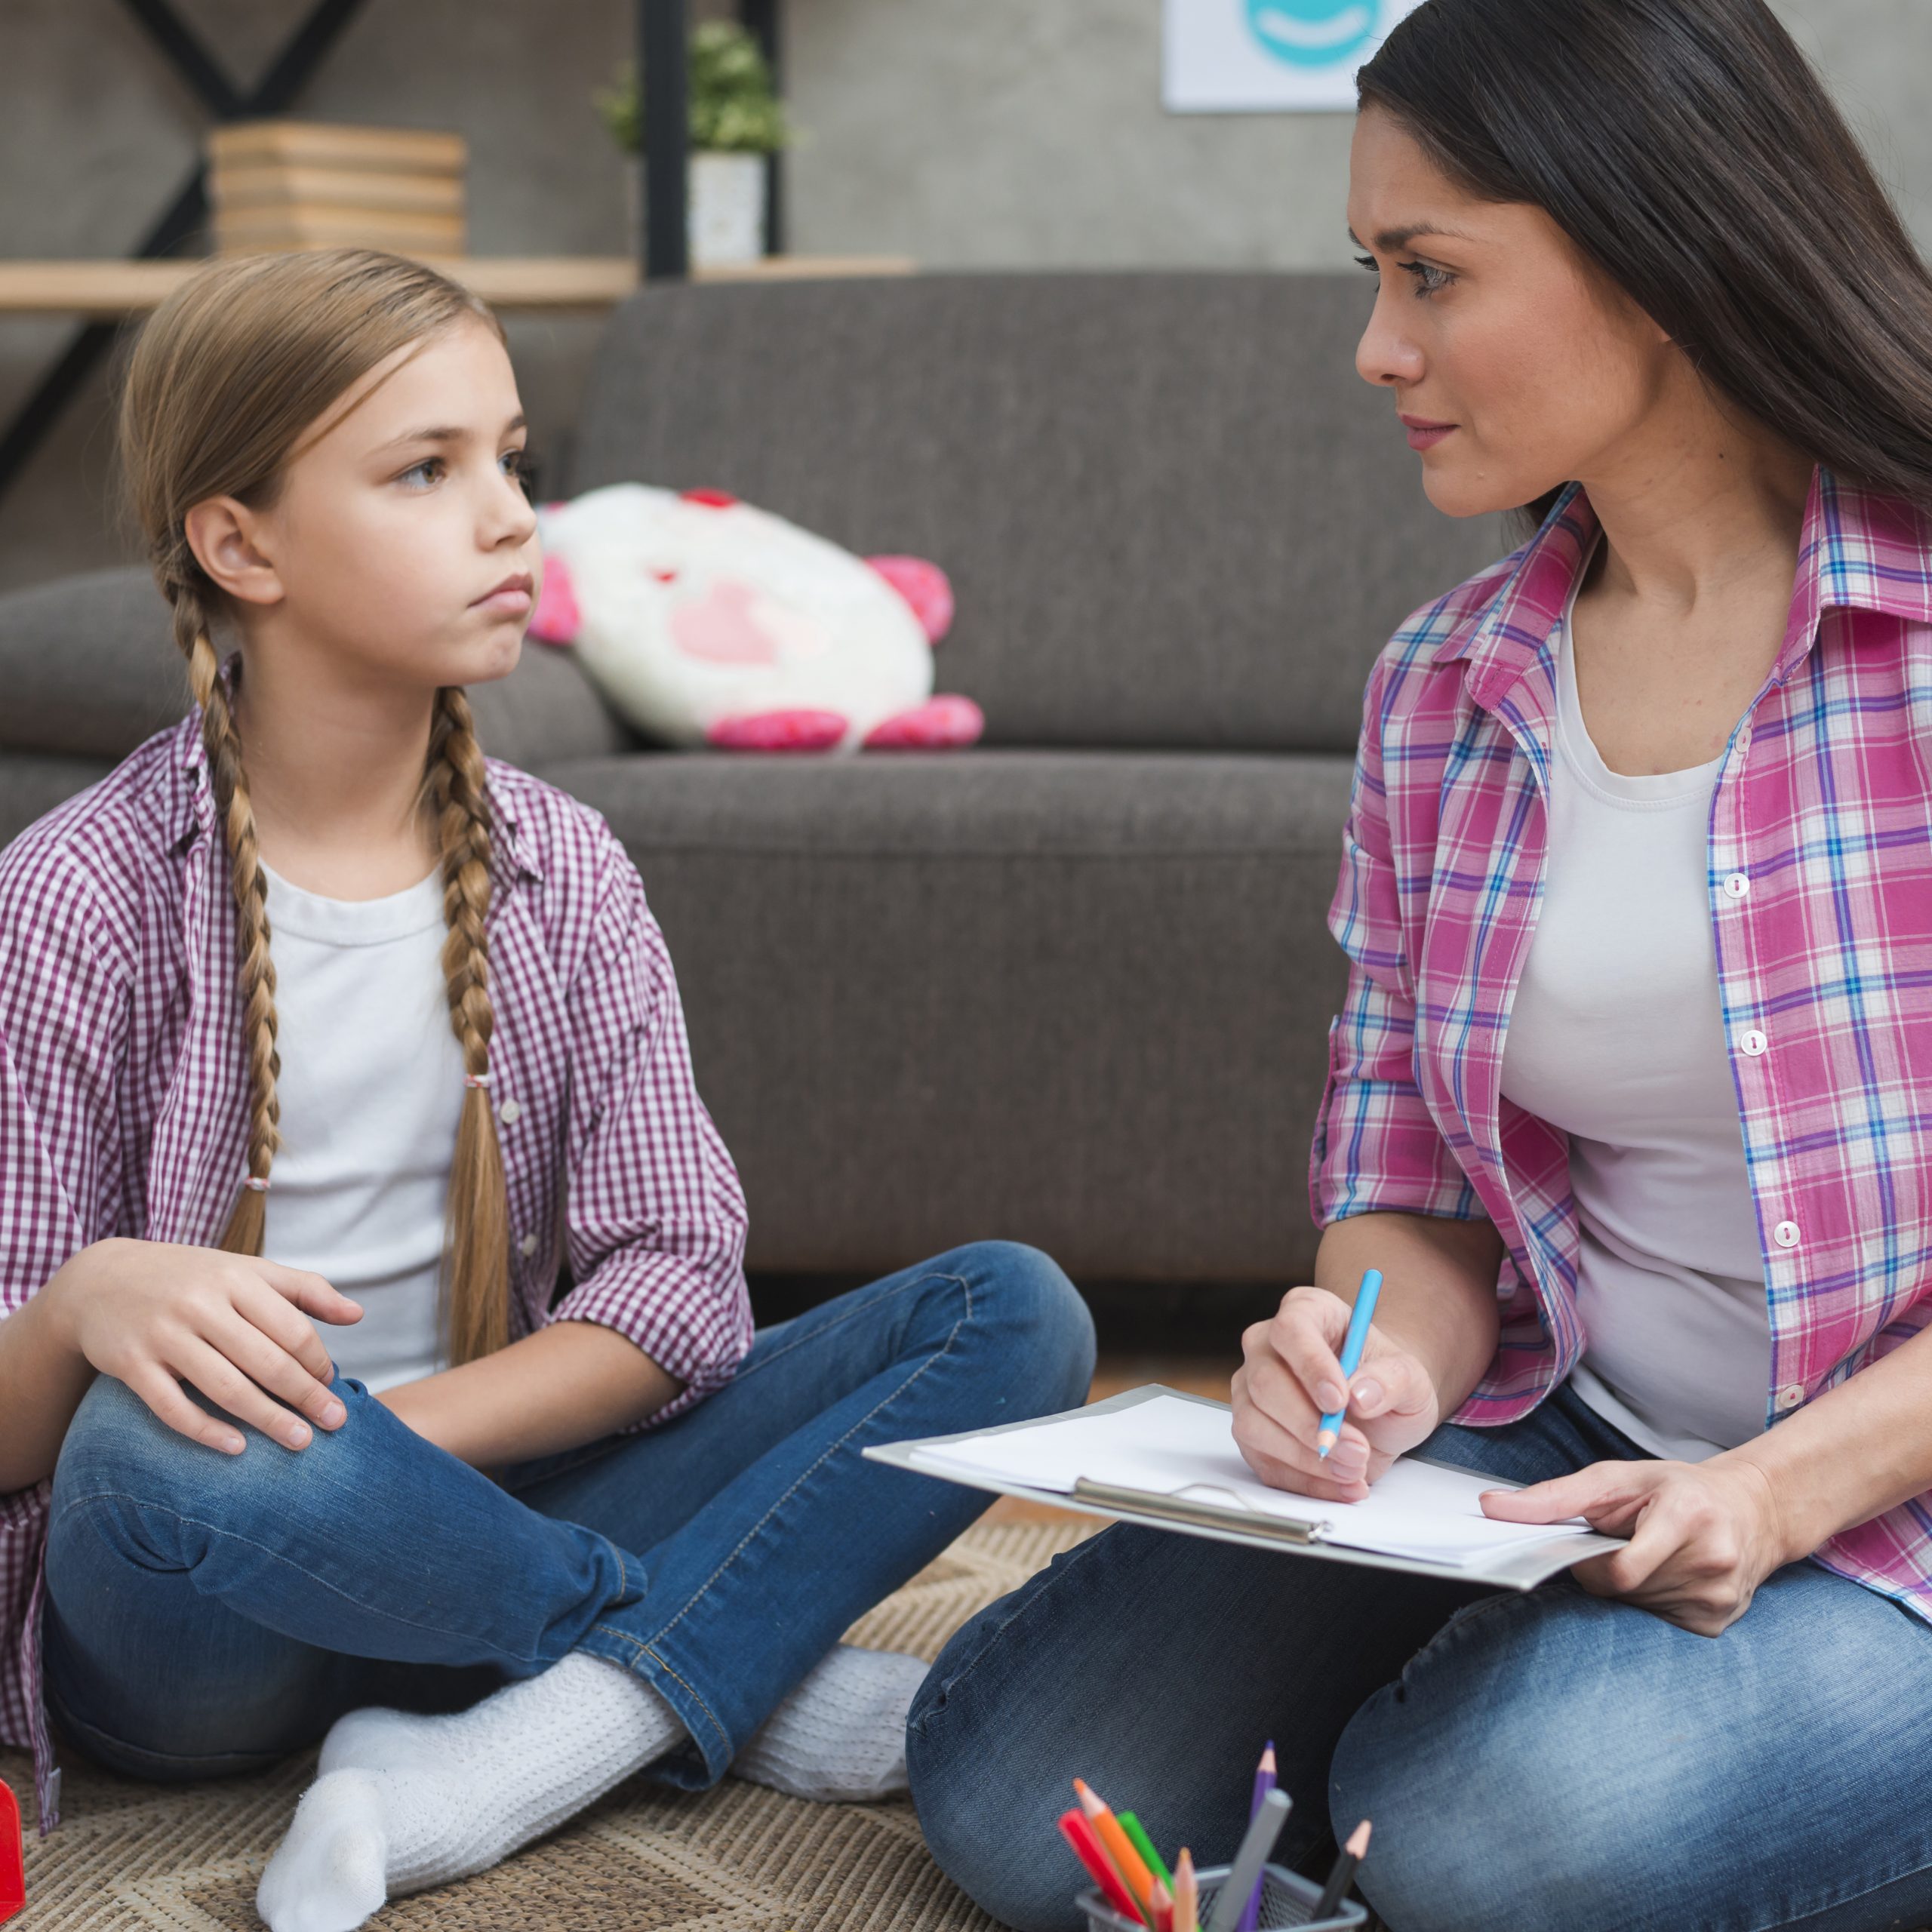 Child psychologist talking to a young girl, notepad in hand, in a cozy room setting.